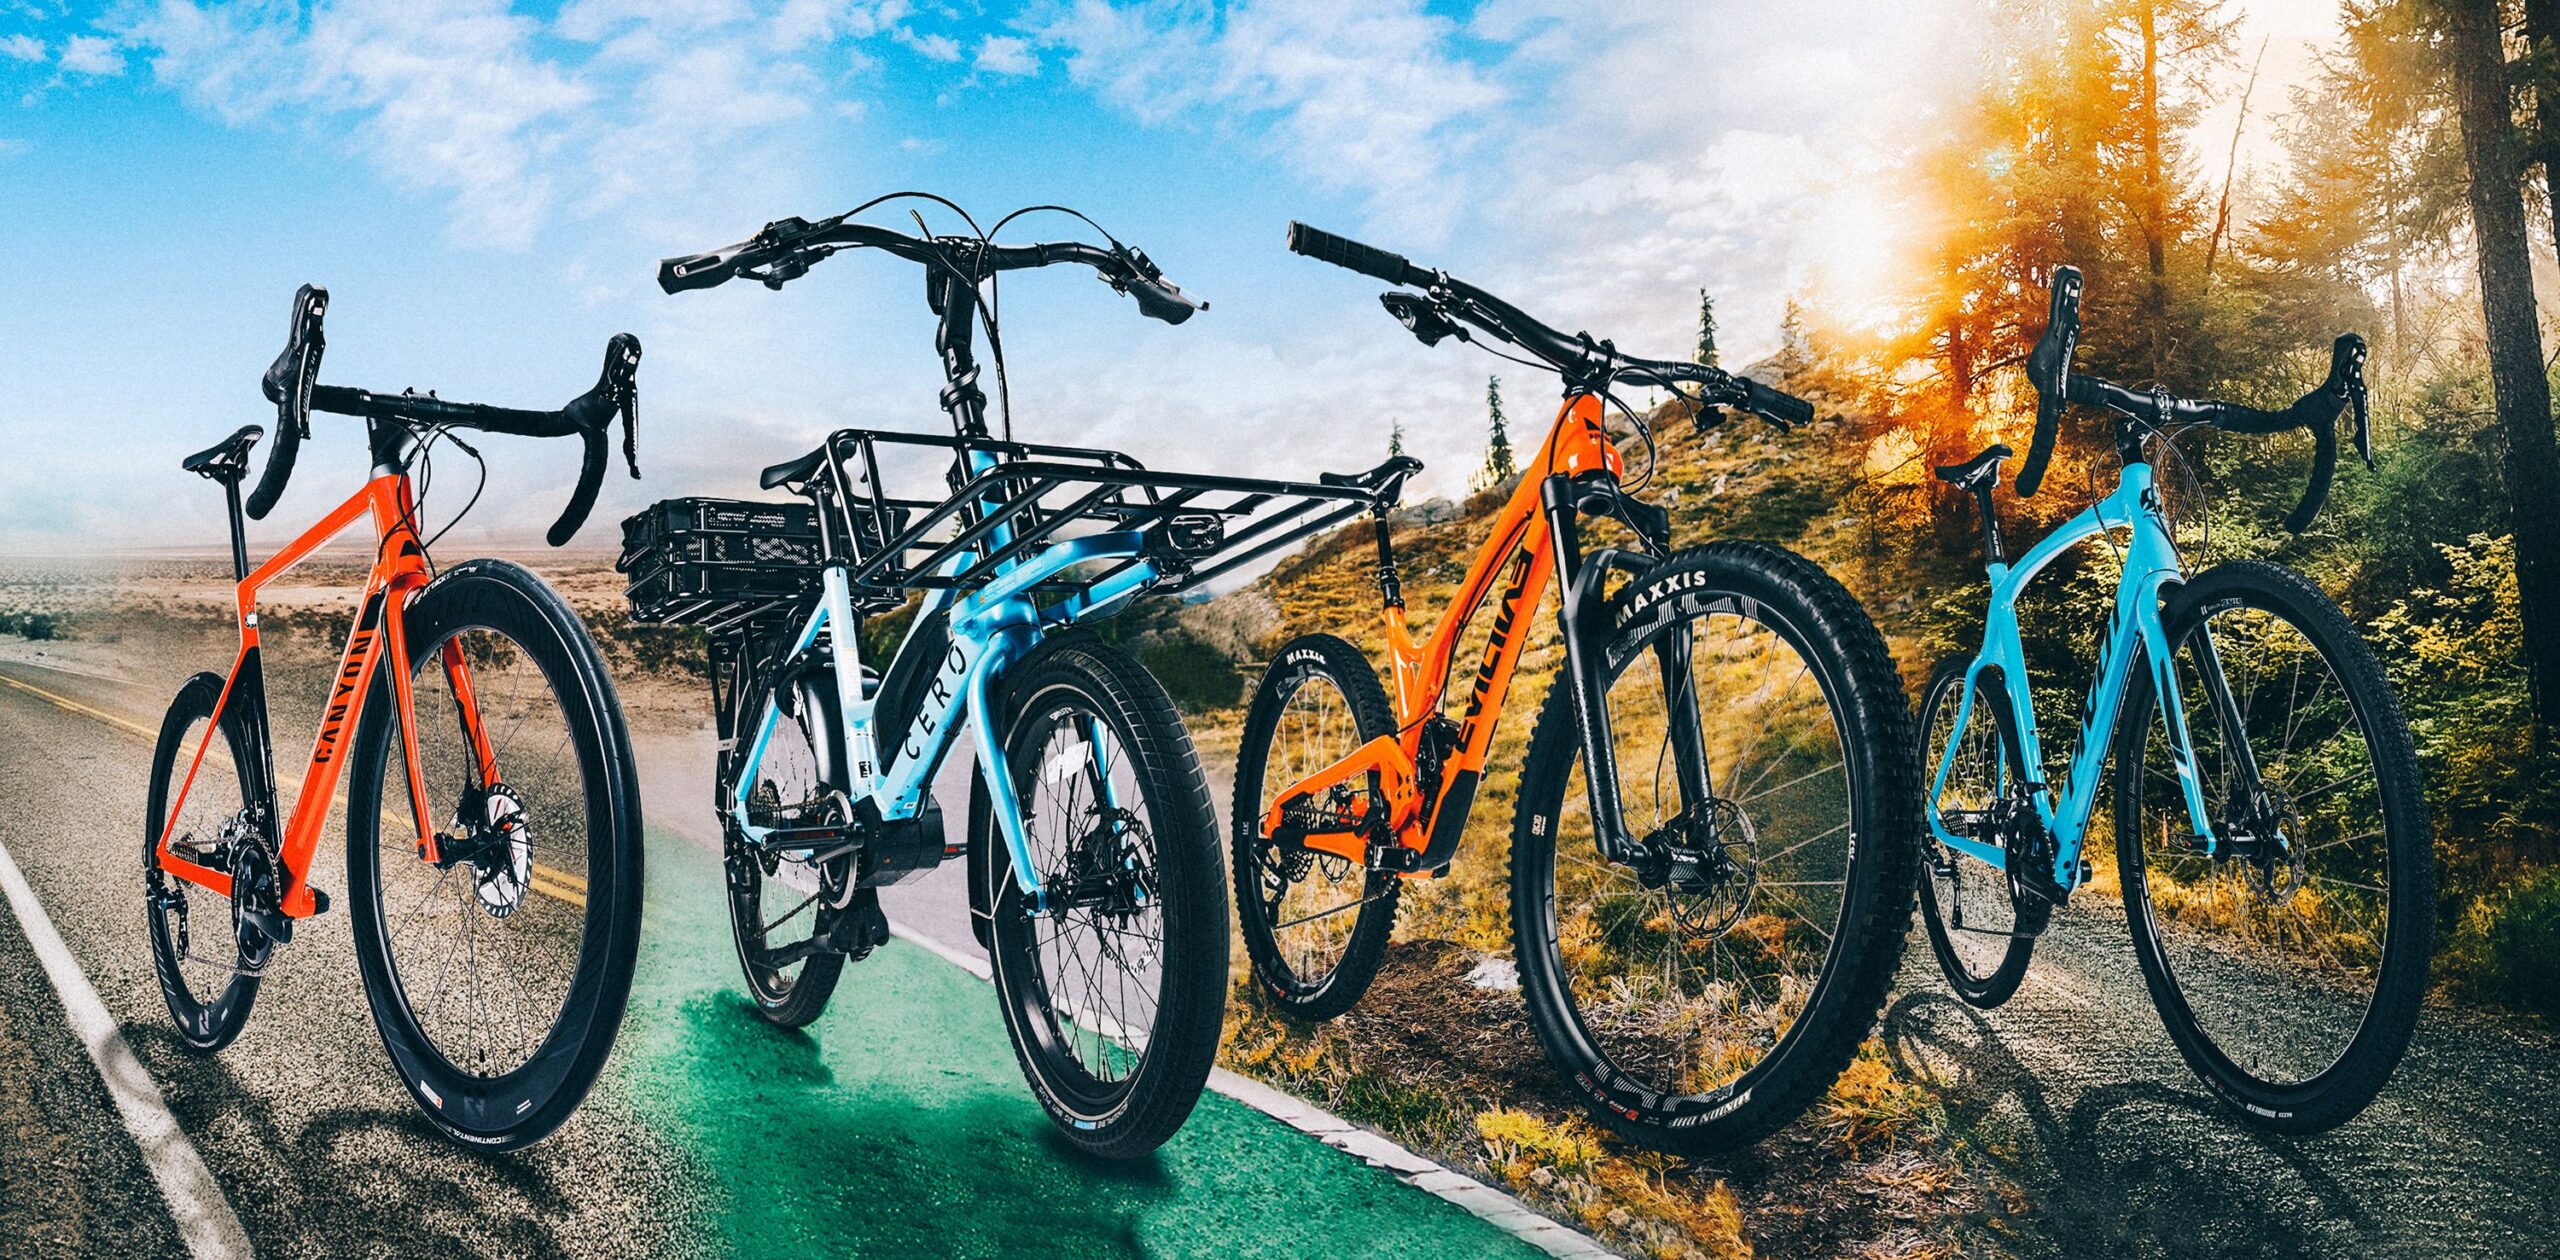 5 Best Gear Bicycles to Buy if You're Looking for a Comfortable Bike